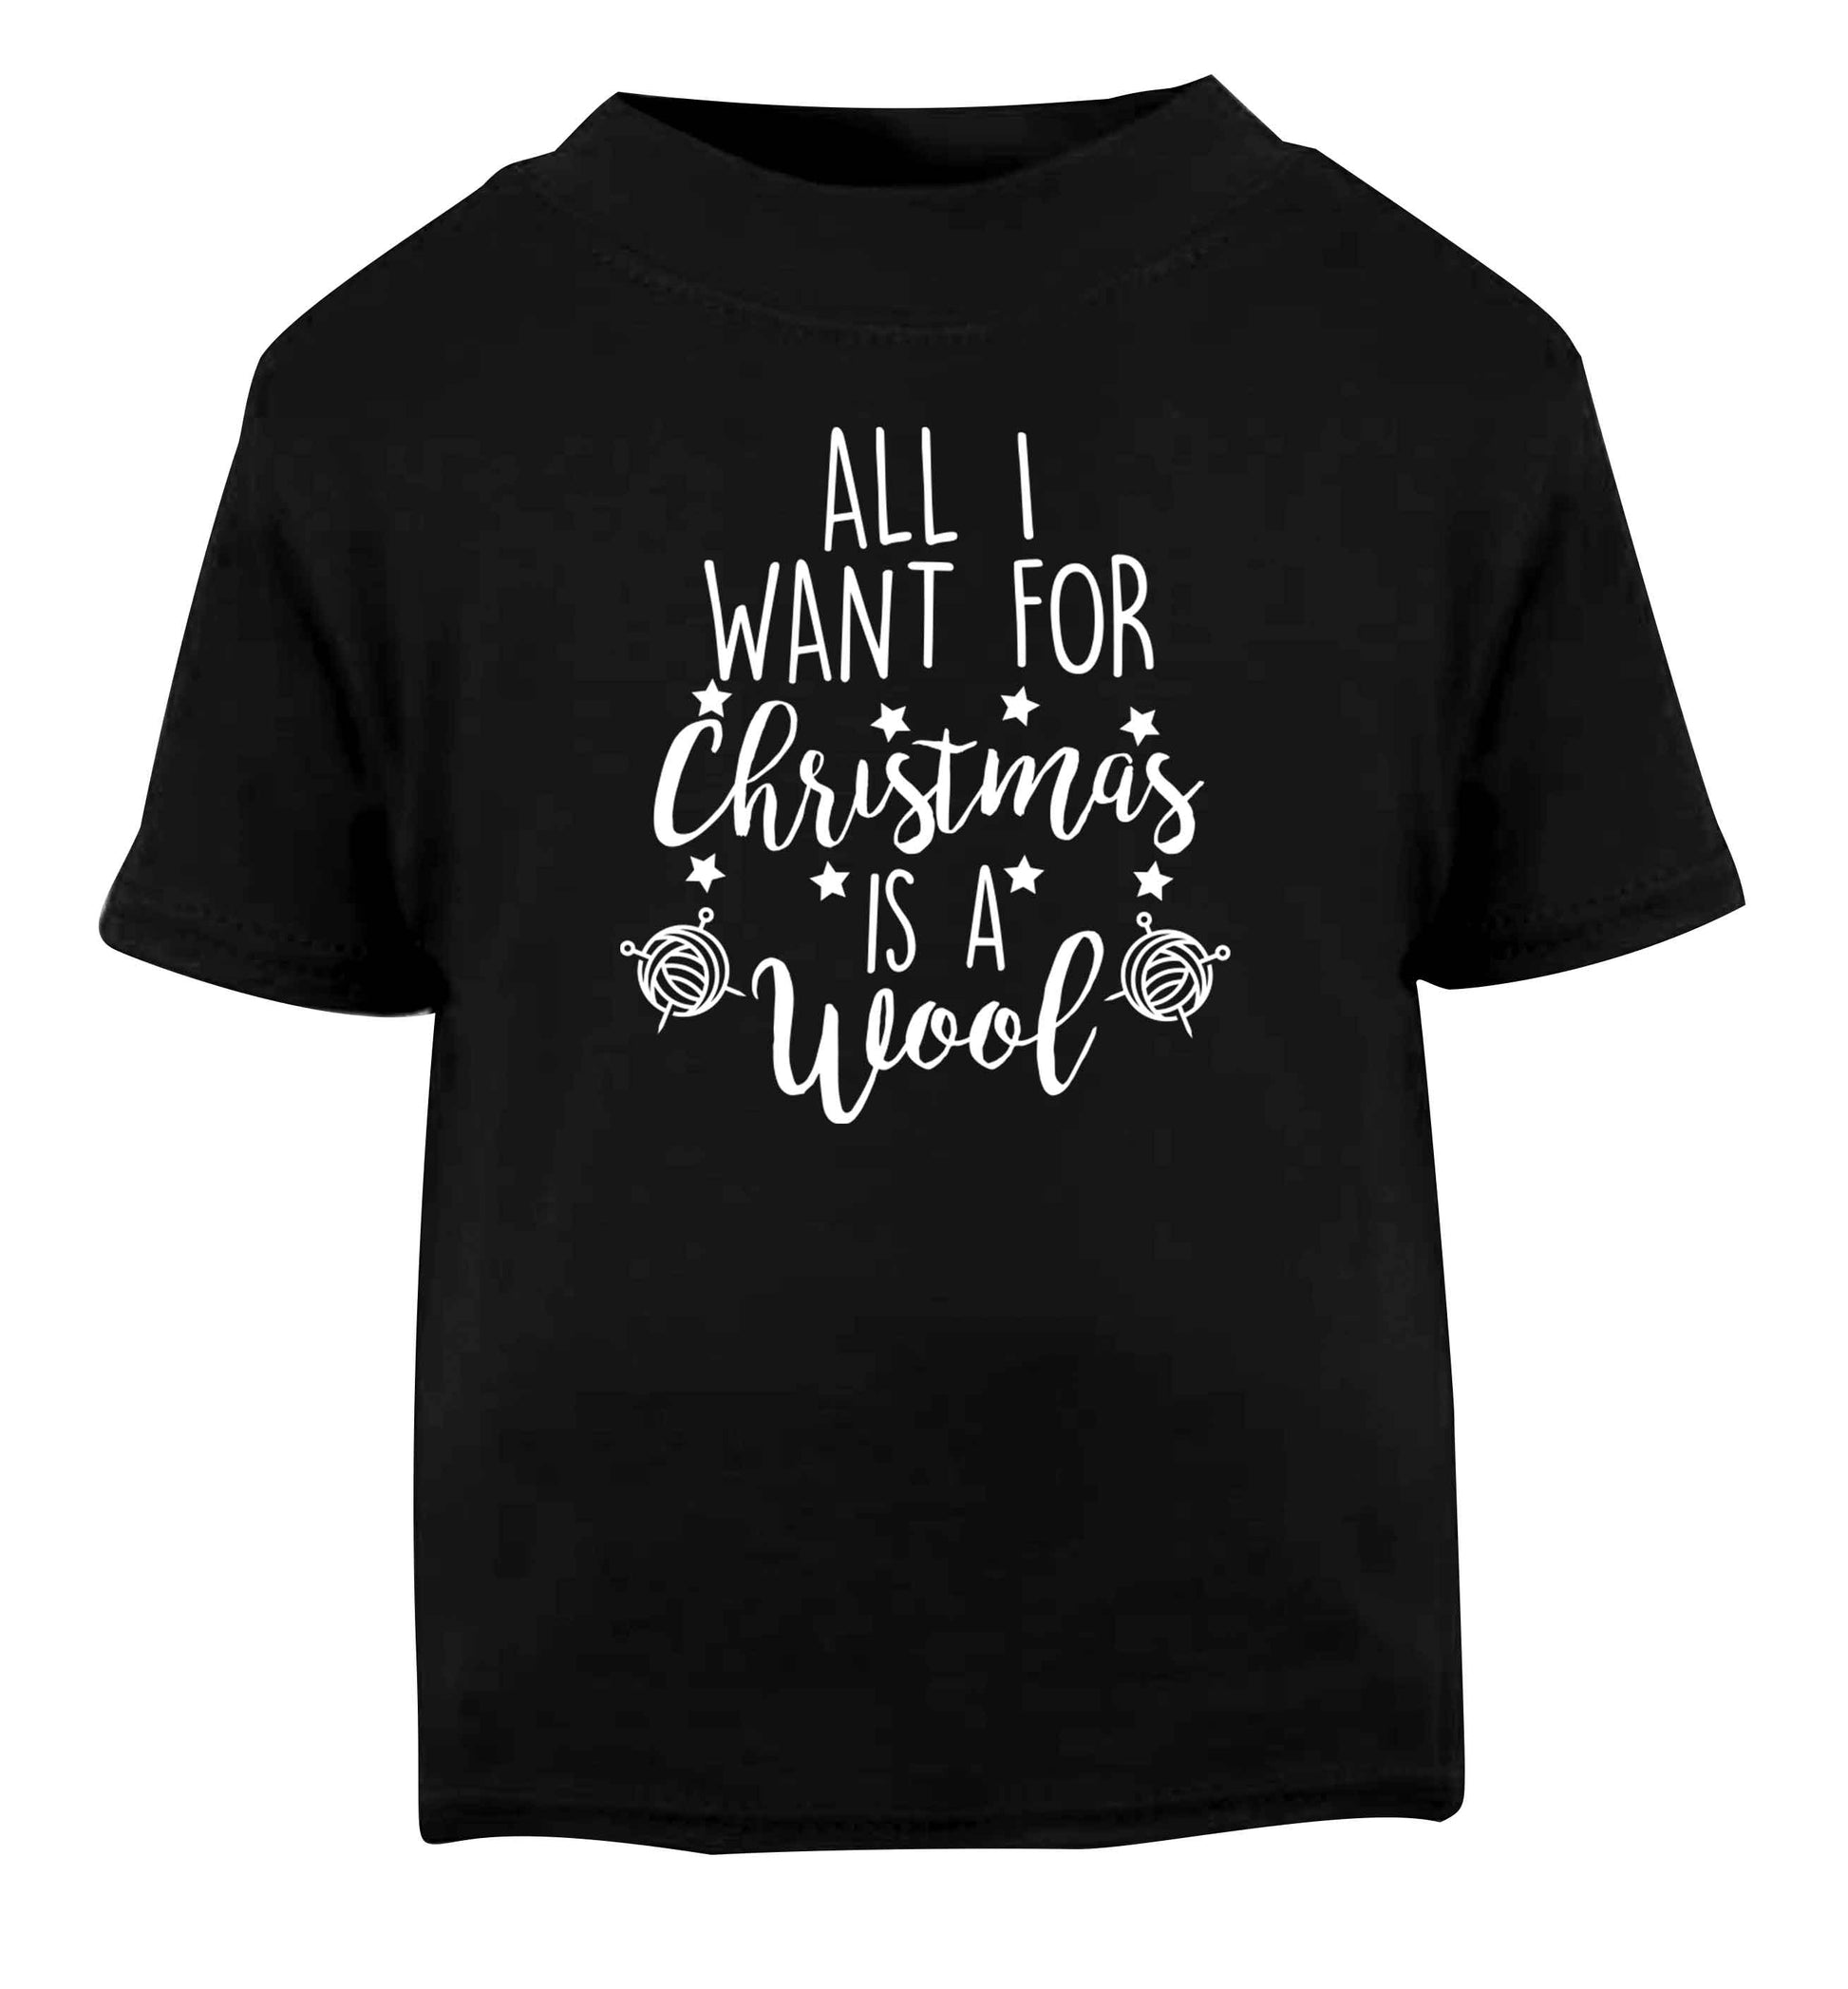 All I want for Christmas is wool! Black Baby Toddler Tshirt 2 years